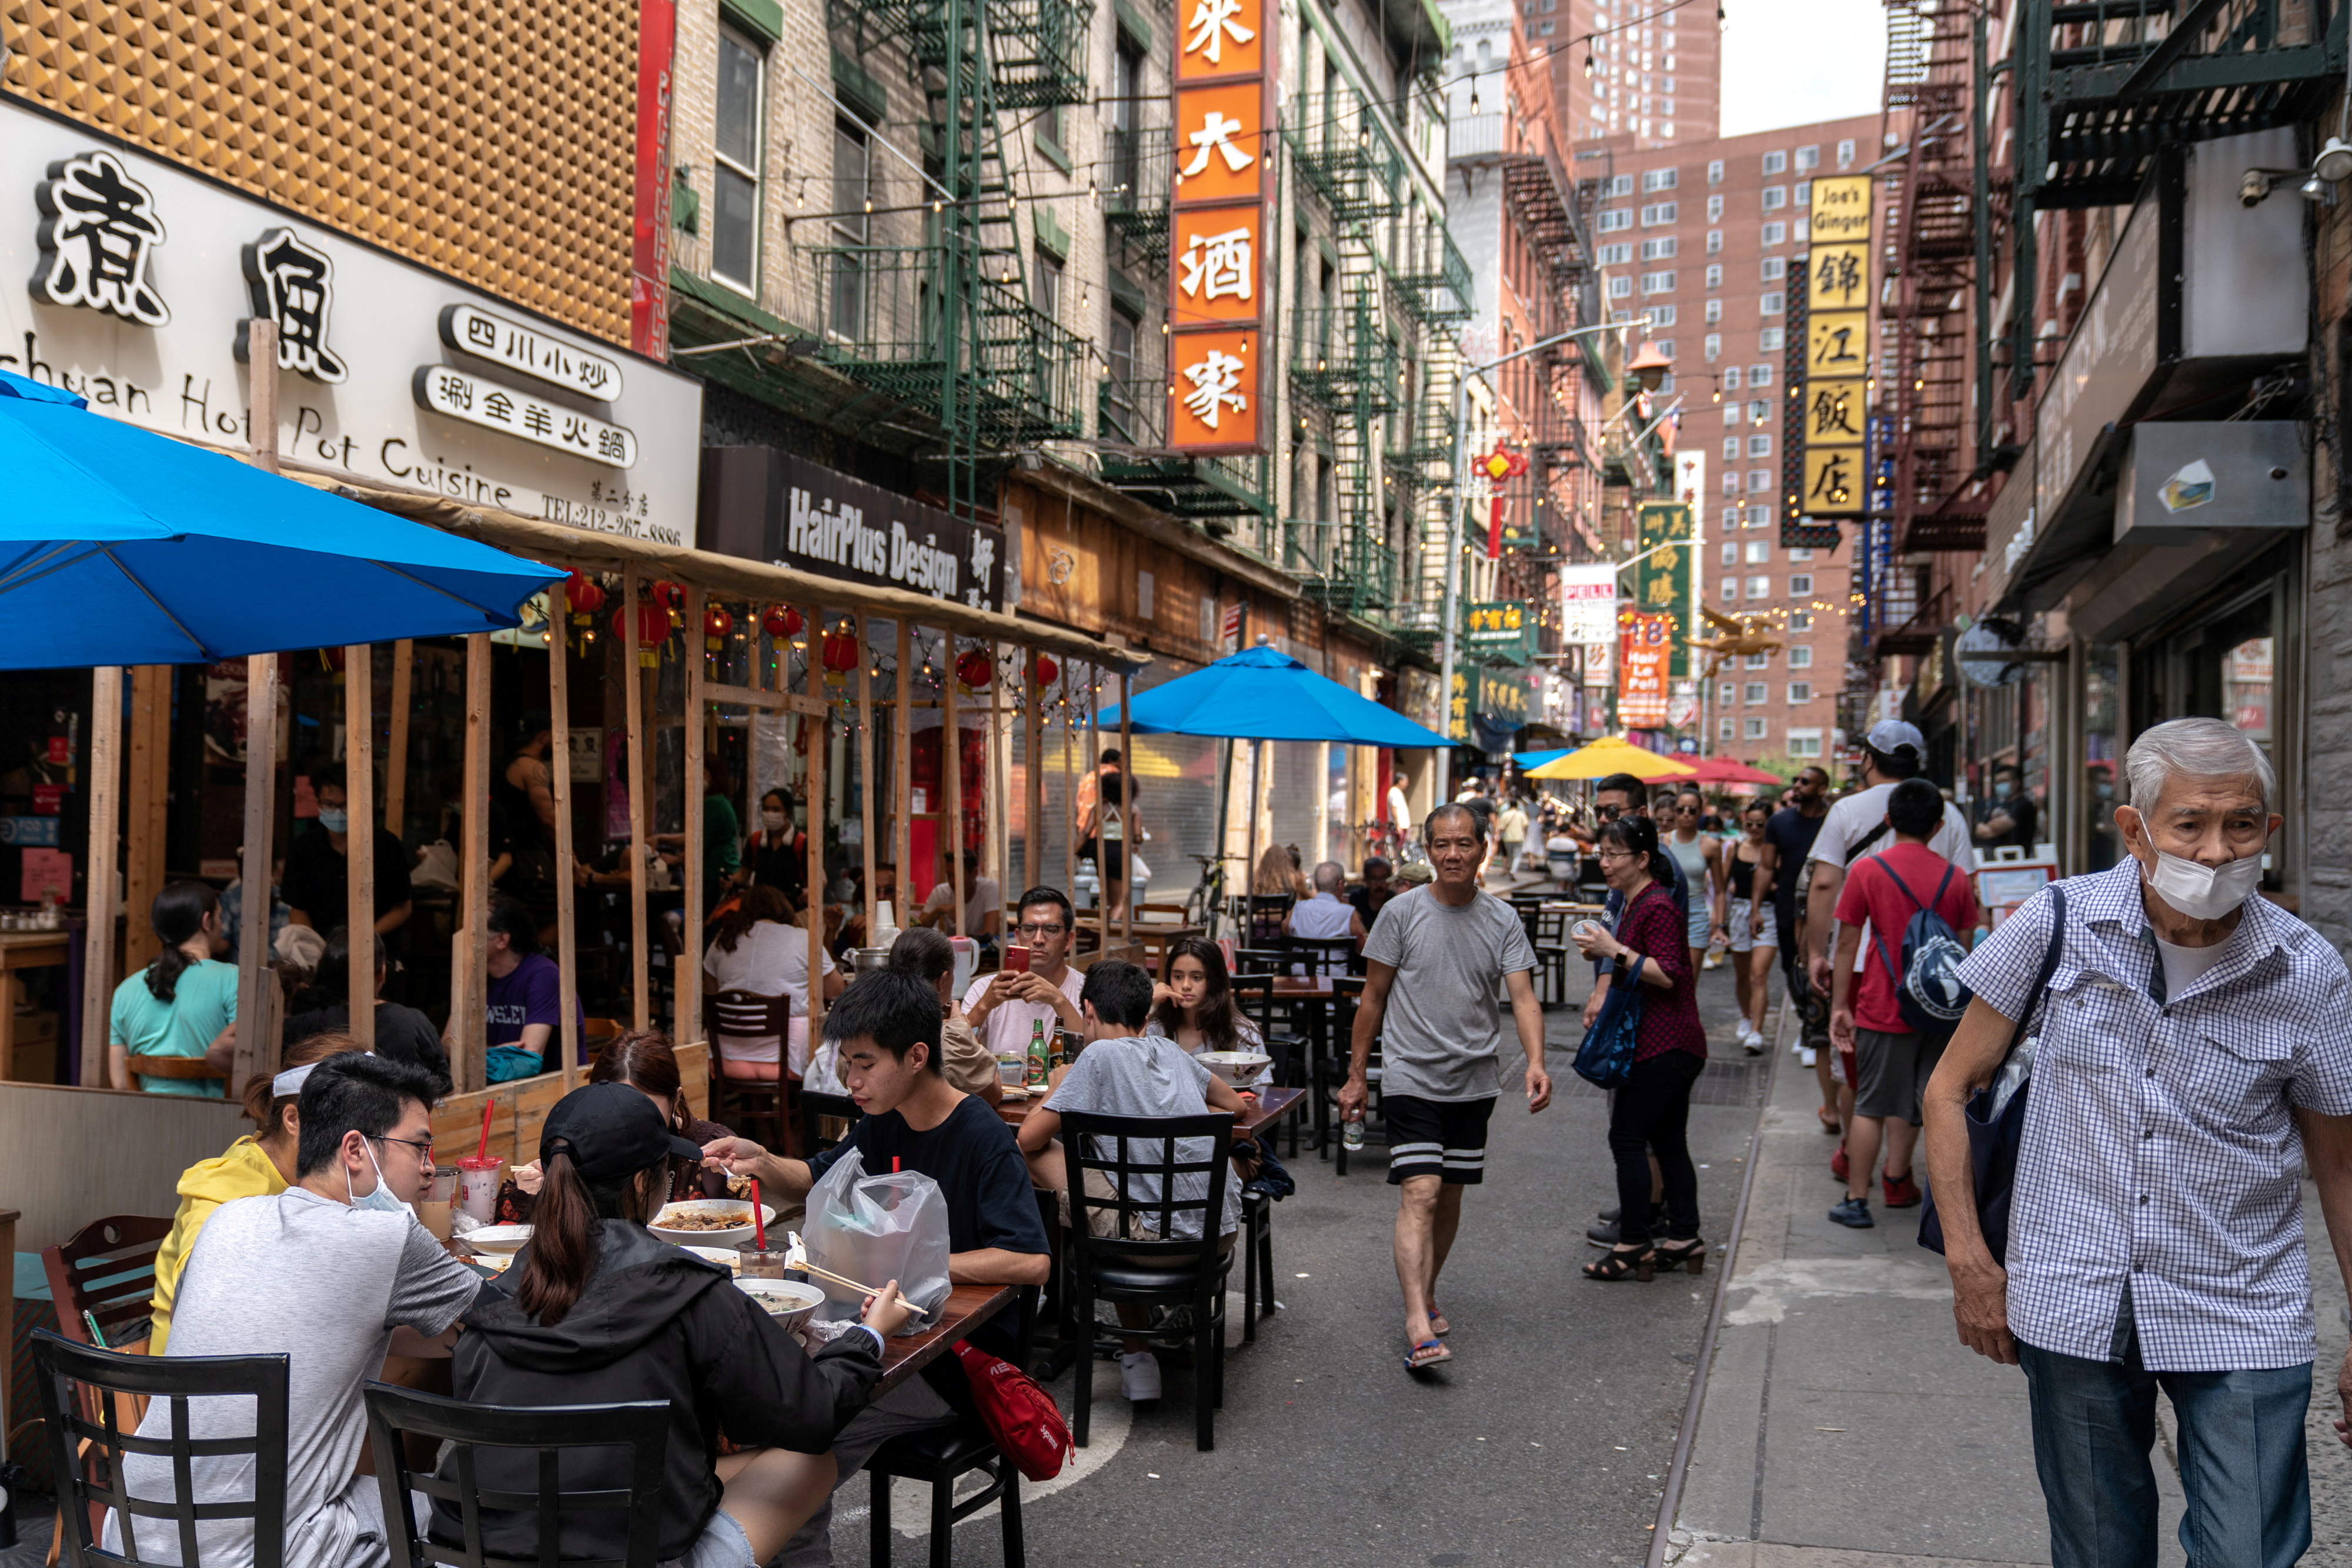 People sit in an outdoor dining area in Manhattan's Chinatown district in New York City